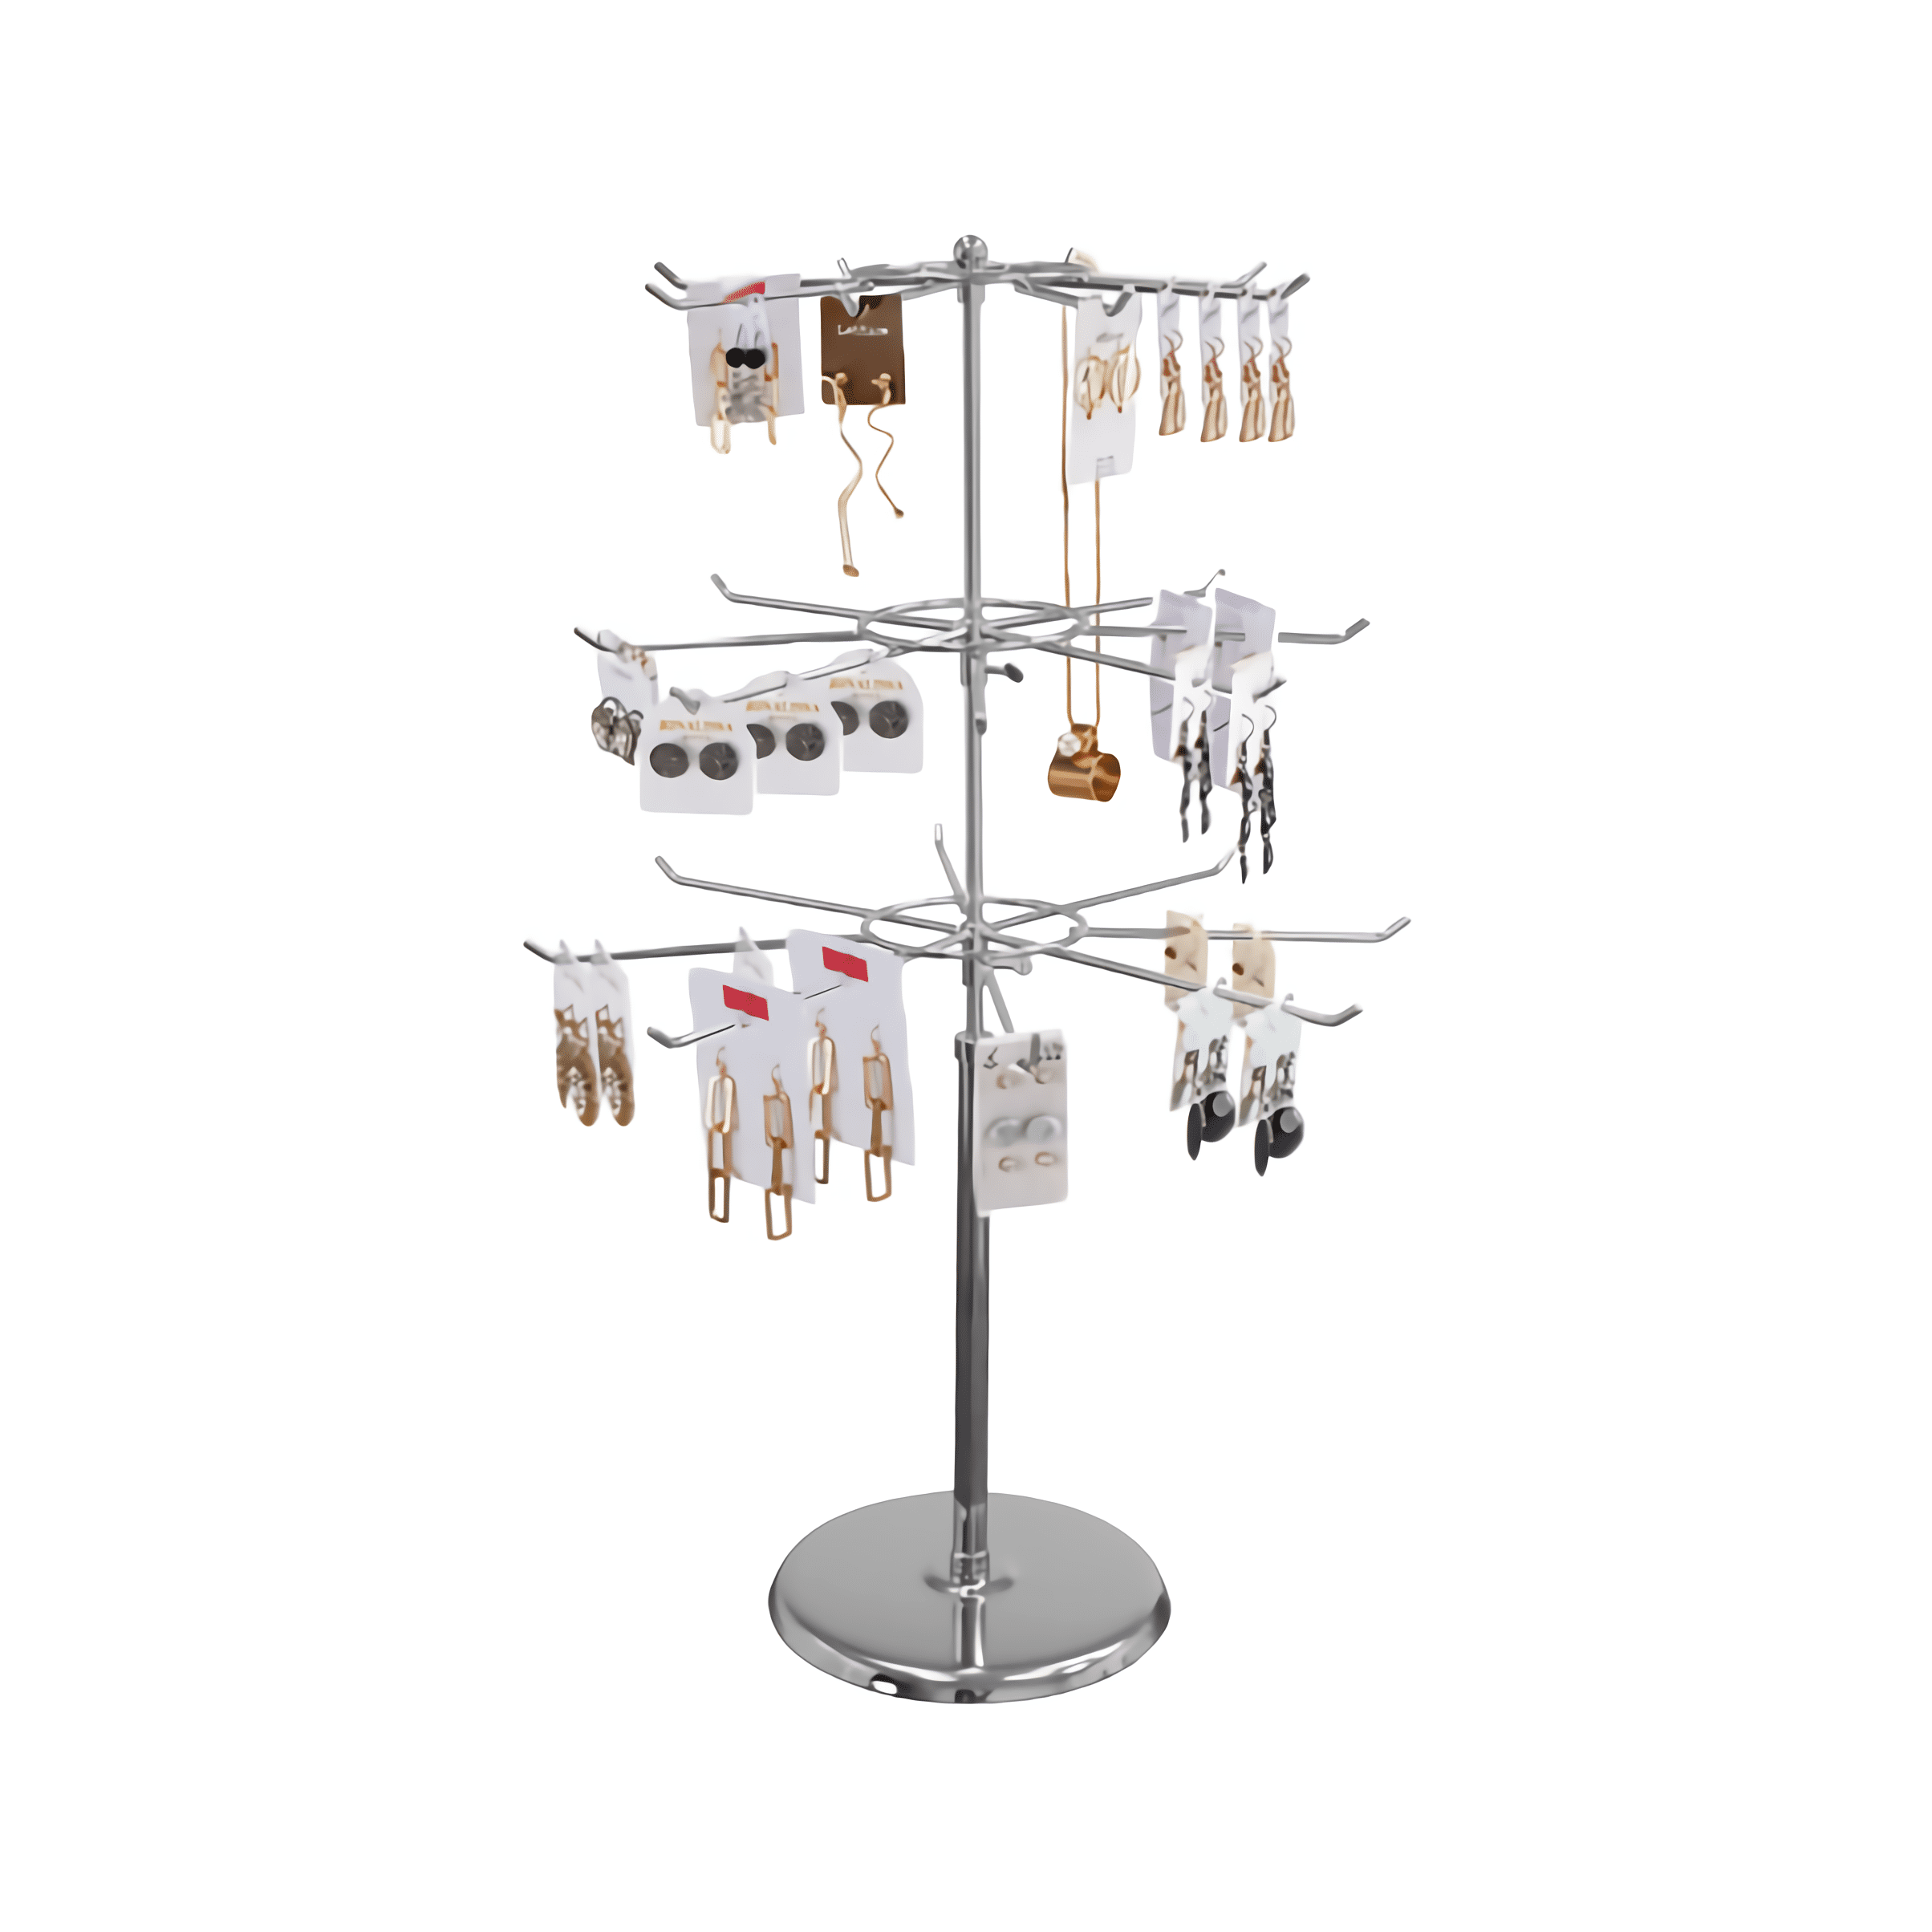 Home Malls lulalula 3 Tier Countertop Spinner Display Stand Rotating Jewelry Display Rack Organizer Tower Revolving Necklace Tree Holder for Girls Retail Store Showroom 